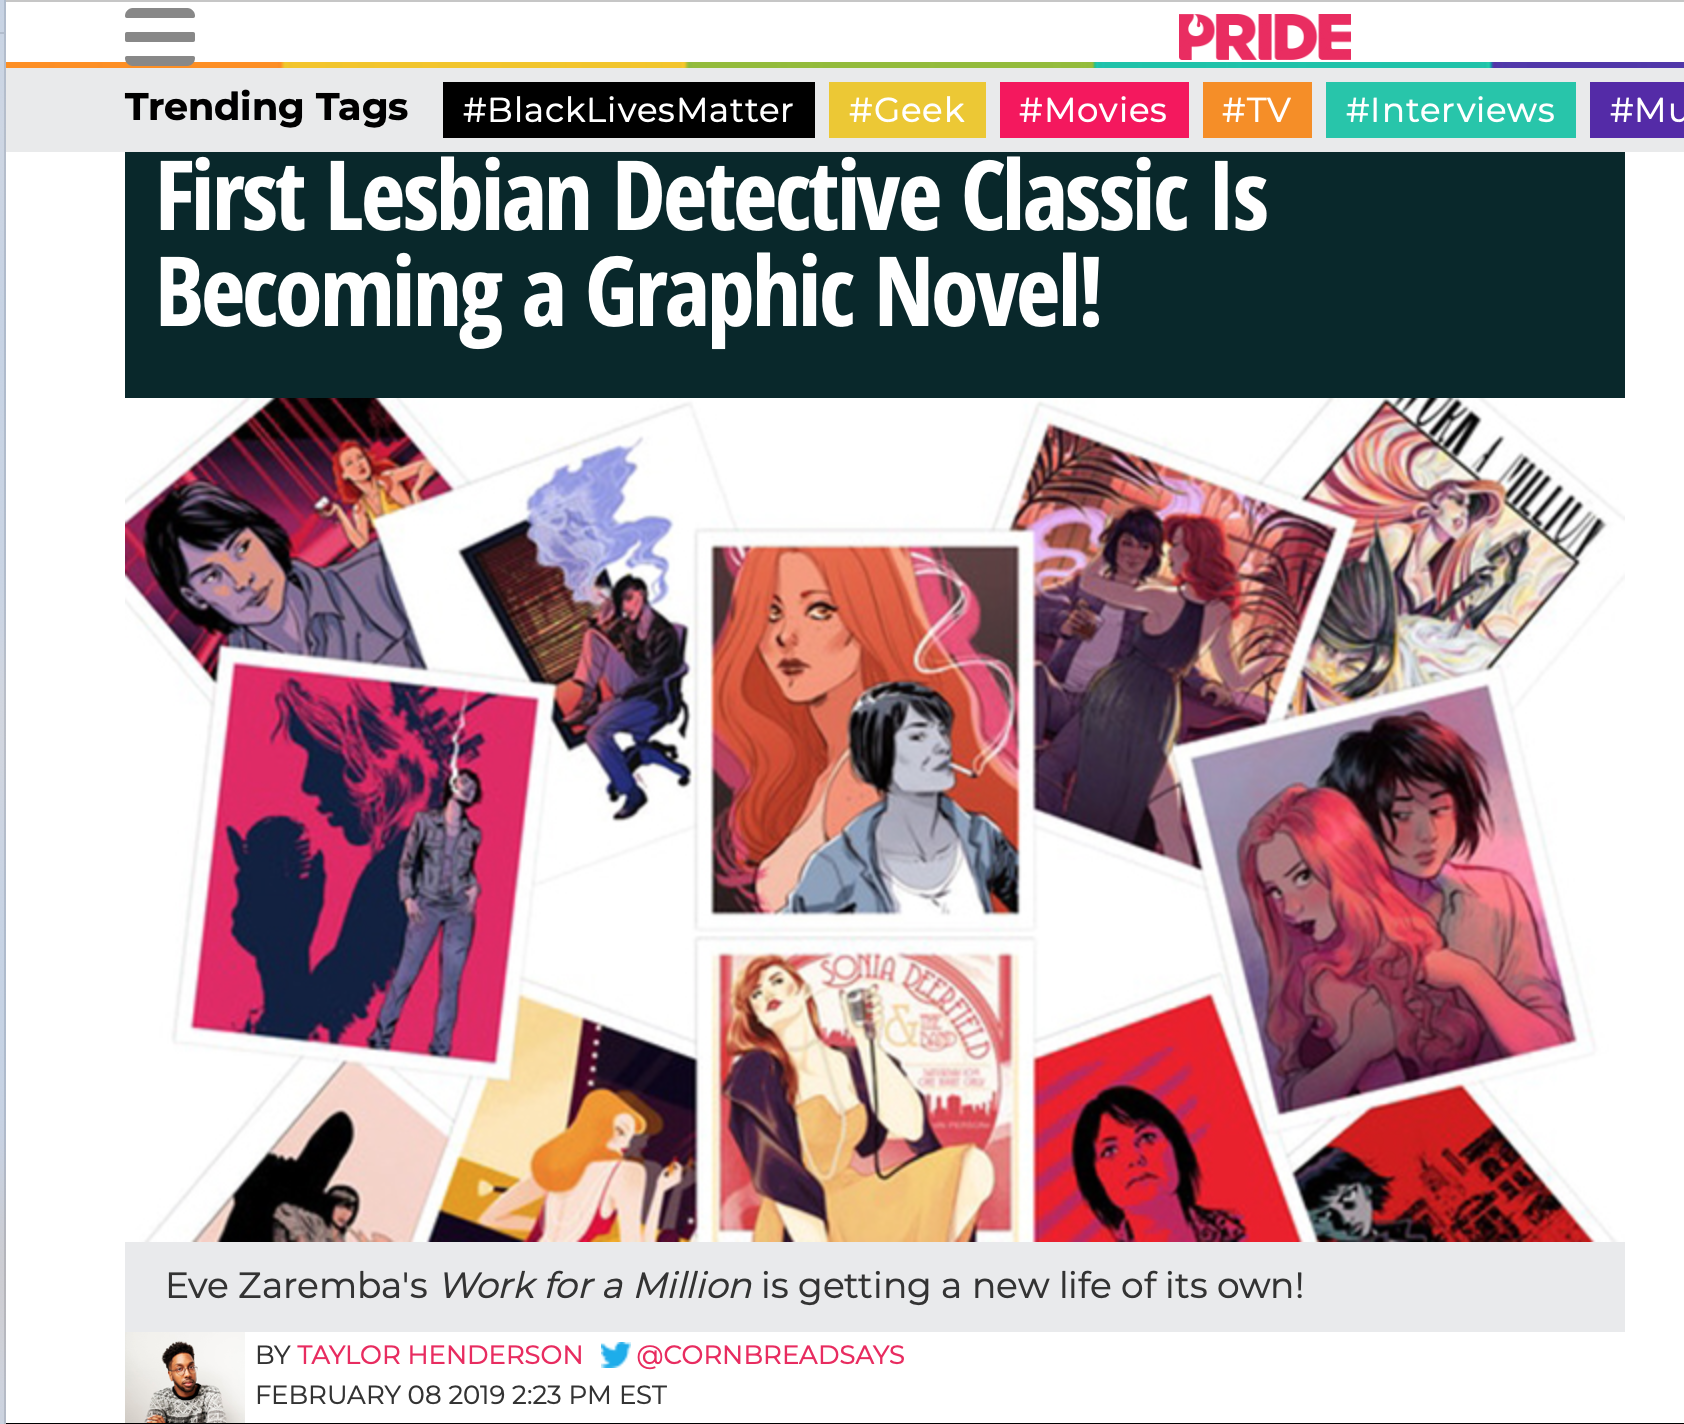 PRIDE: First Lesbian Detective is Becoming a Graphic Novel!